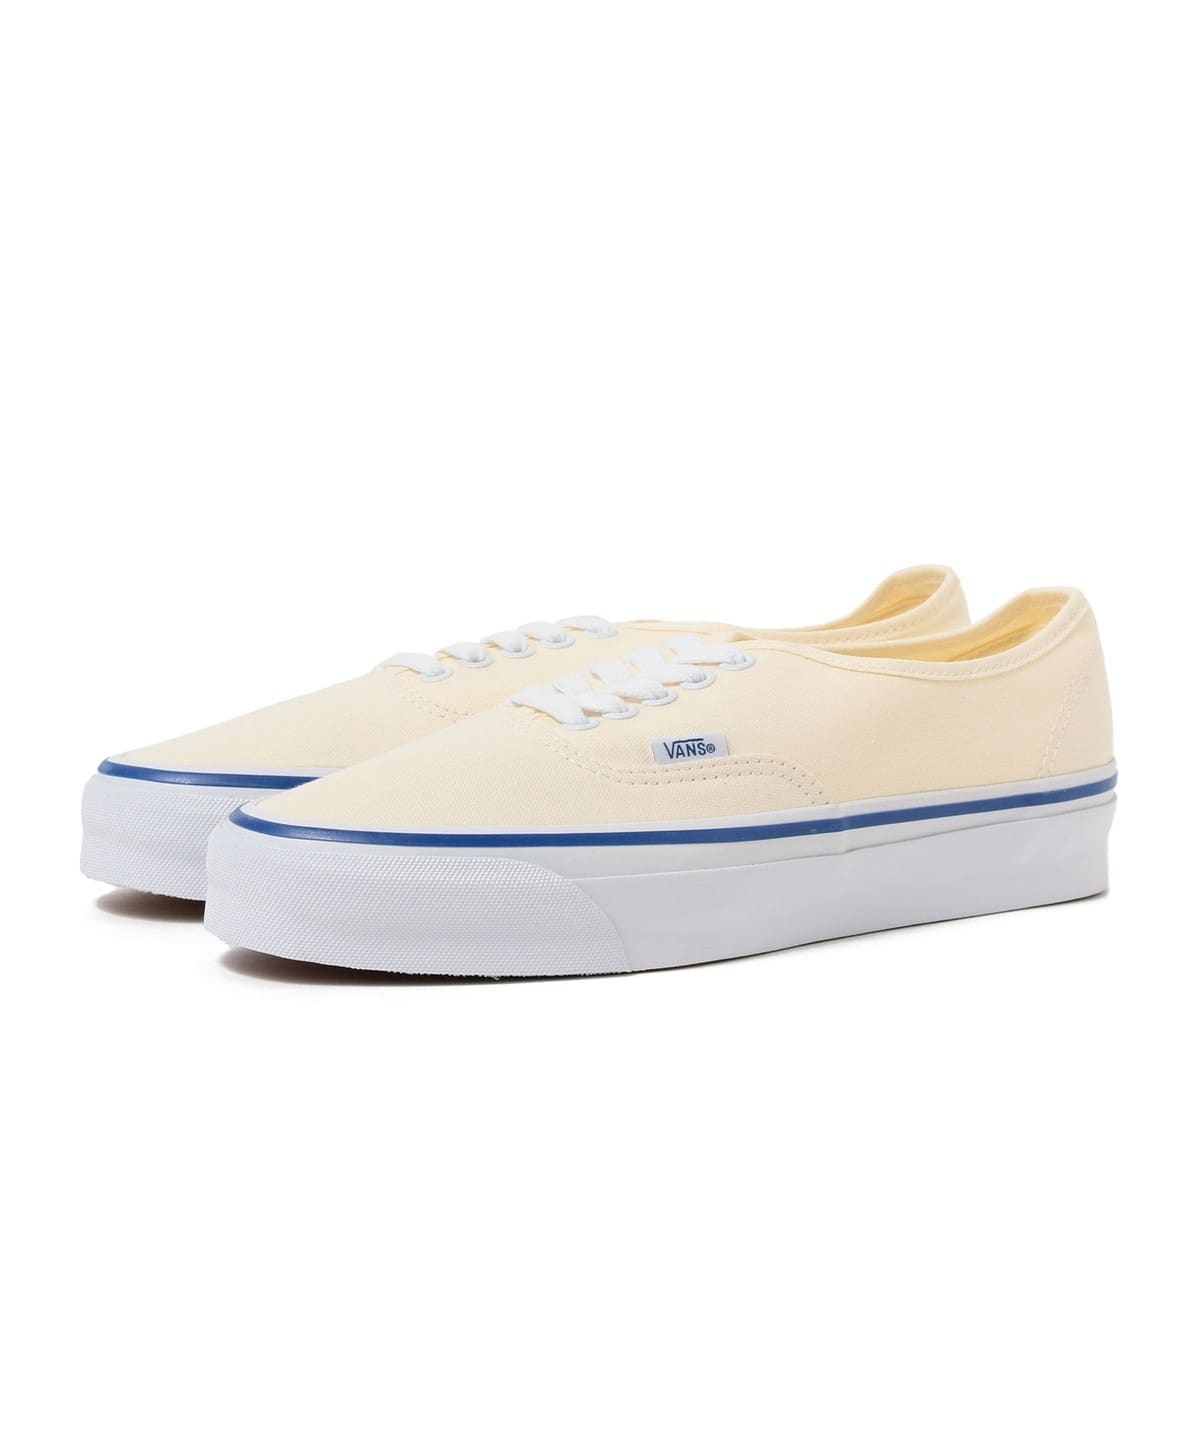 BEAMS（ビームス）VANS / AUTHENTIC REISSUE 44 LX OFF WHITE